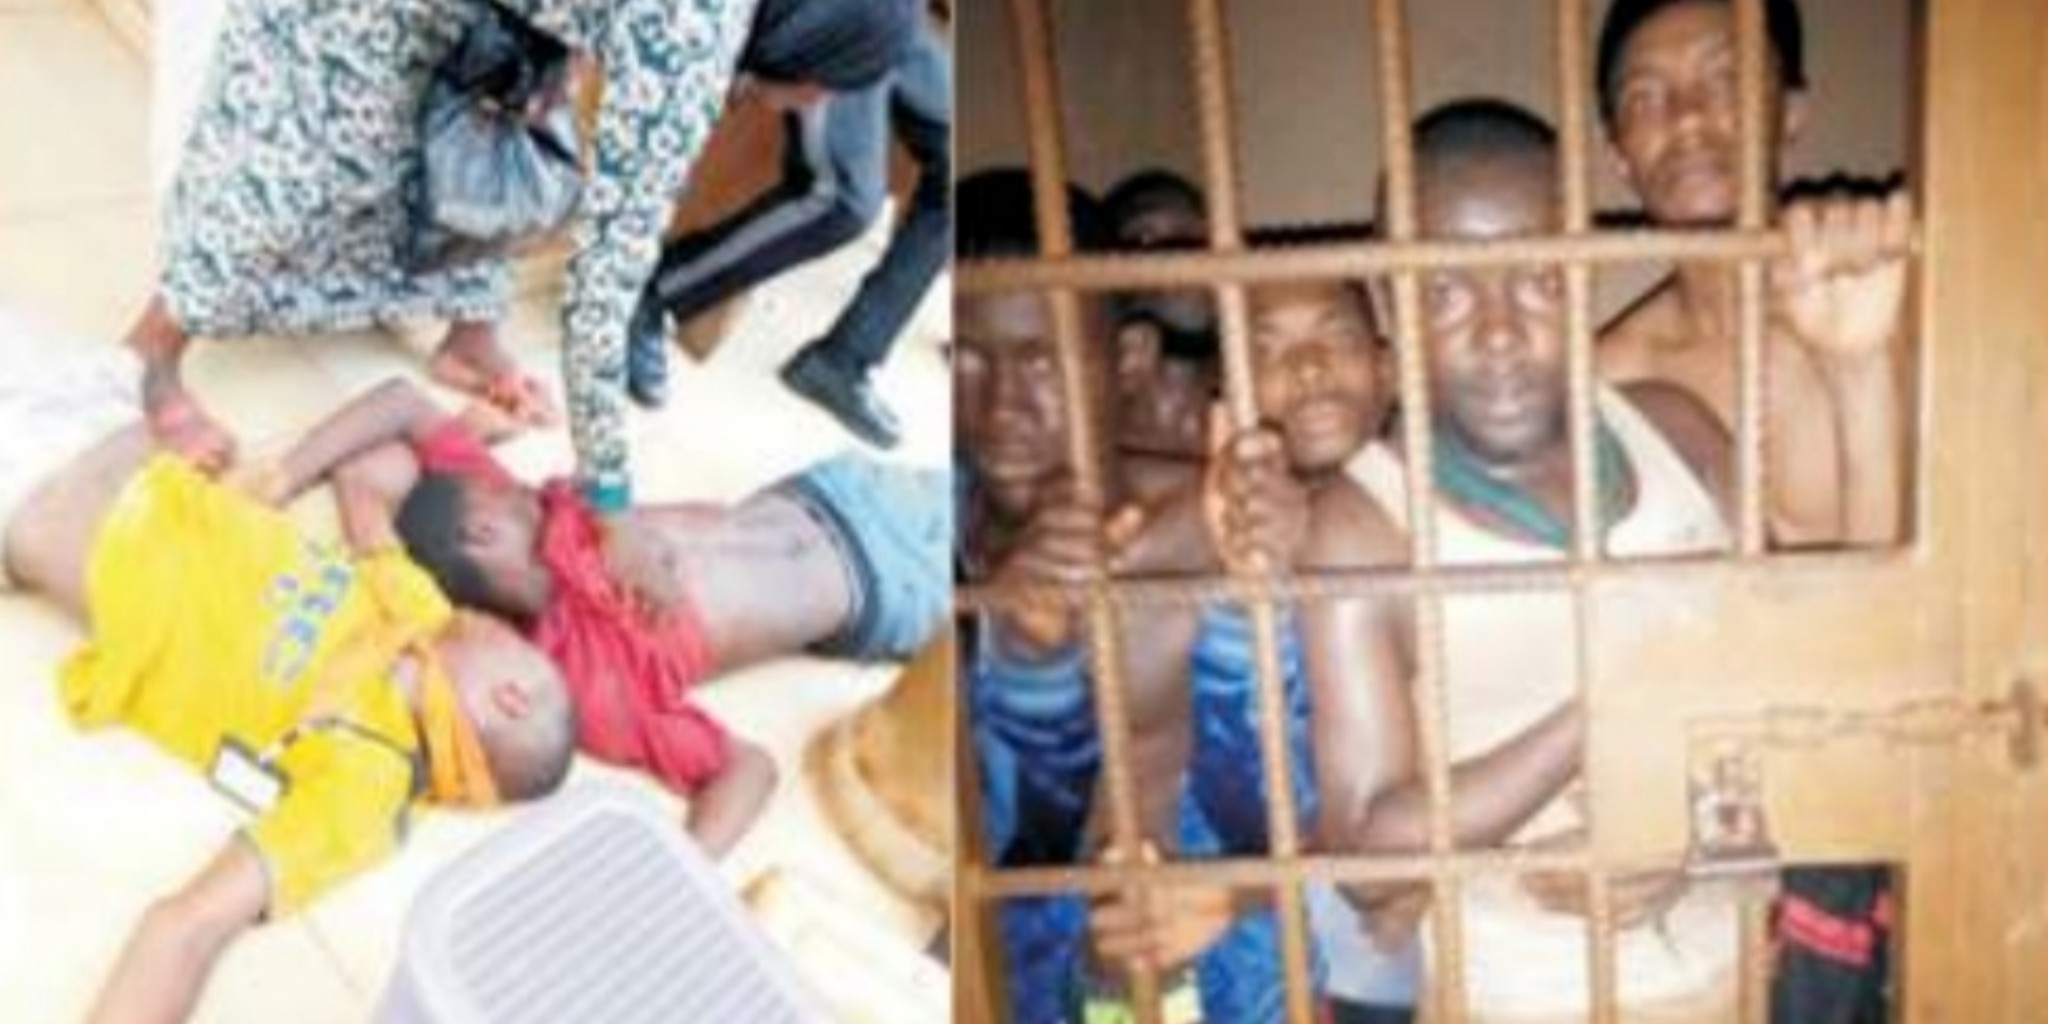 Sierra Leone Police Arrests And Lock up 53 Pupils in One Cell; 3 in Critical Condition as 16 Collapses